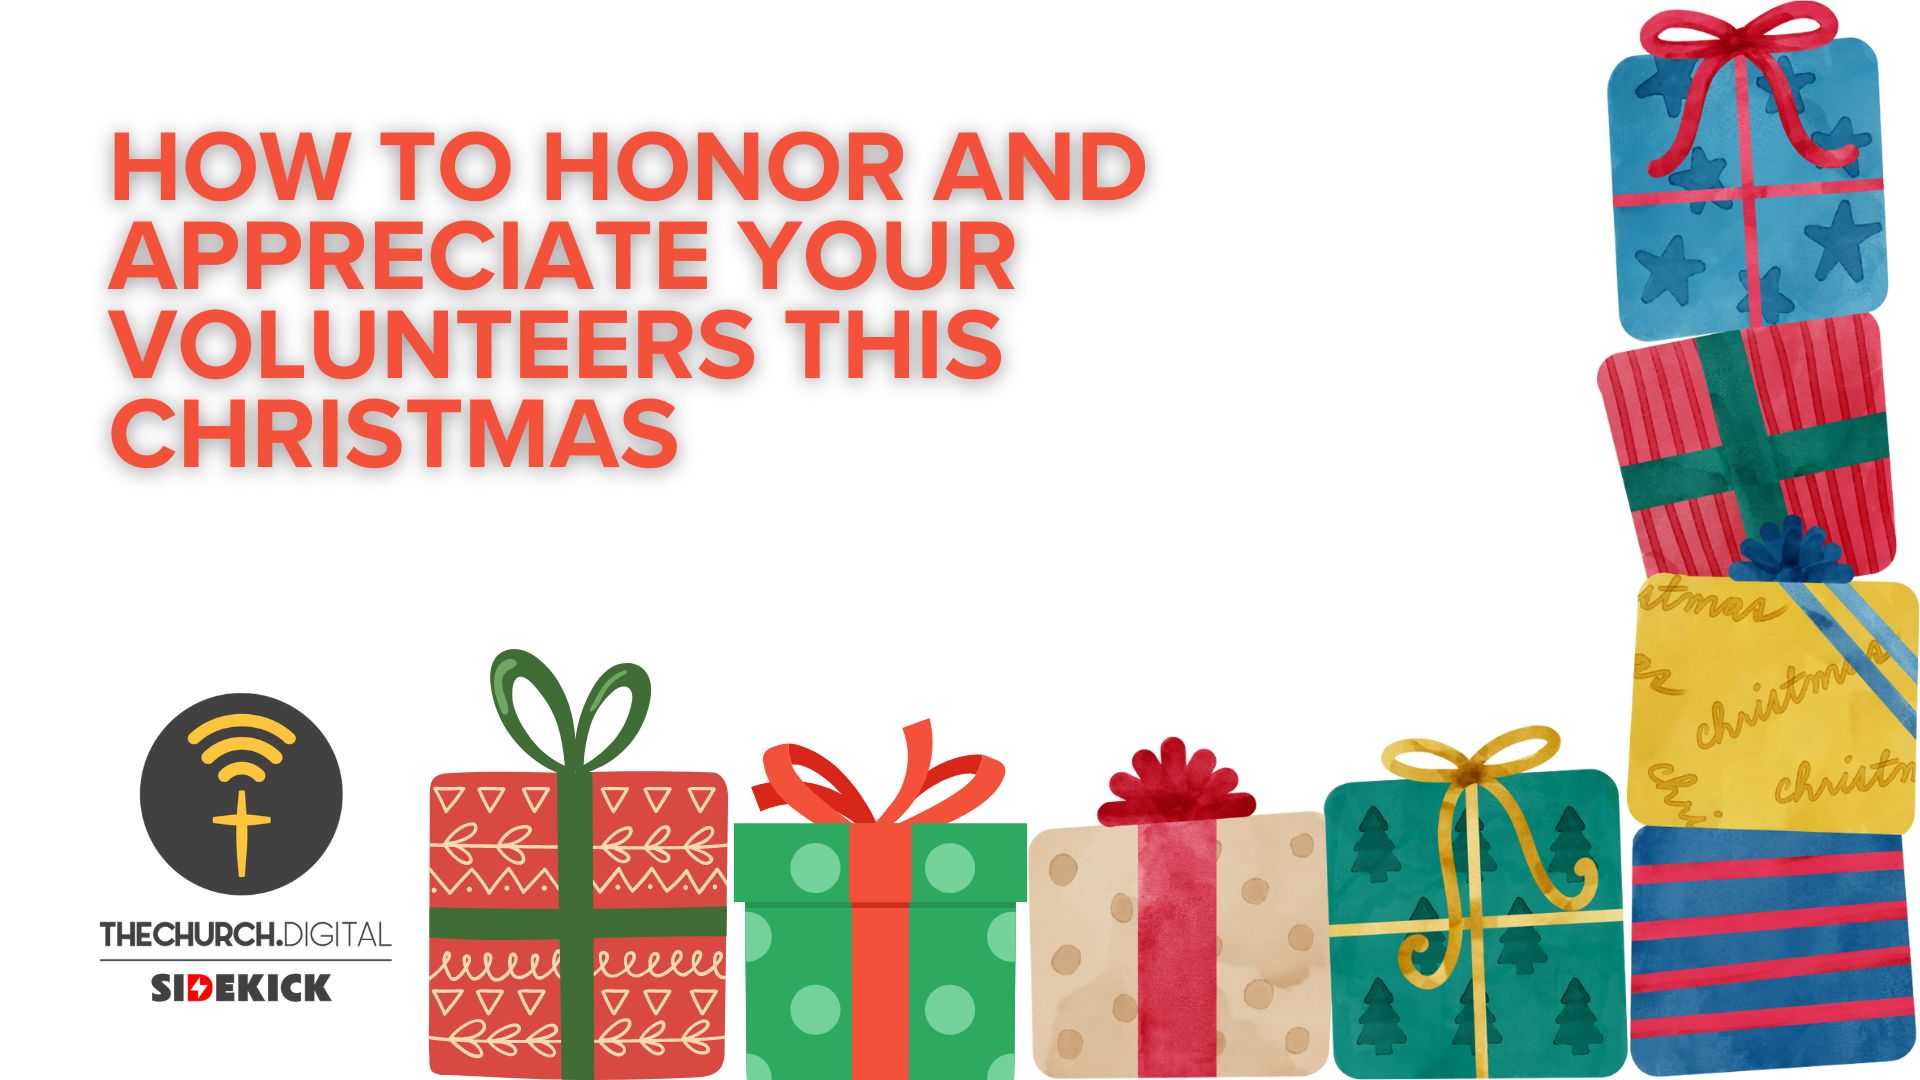 How to Honor and Appreciate Your Volunteers this Christmas